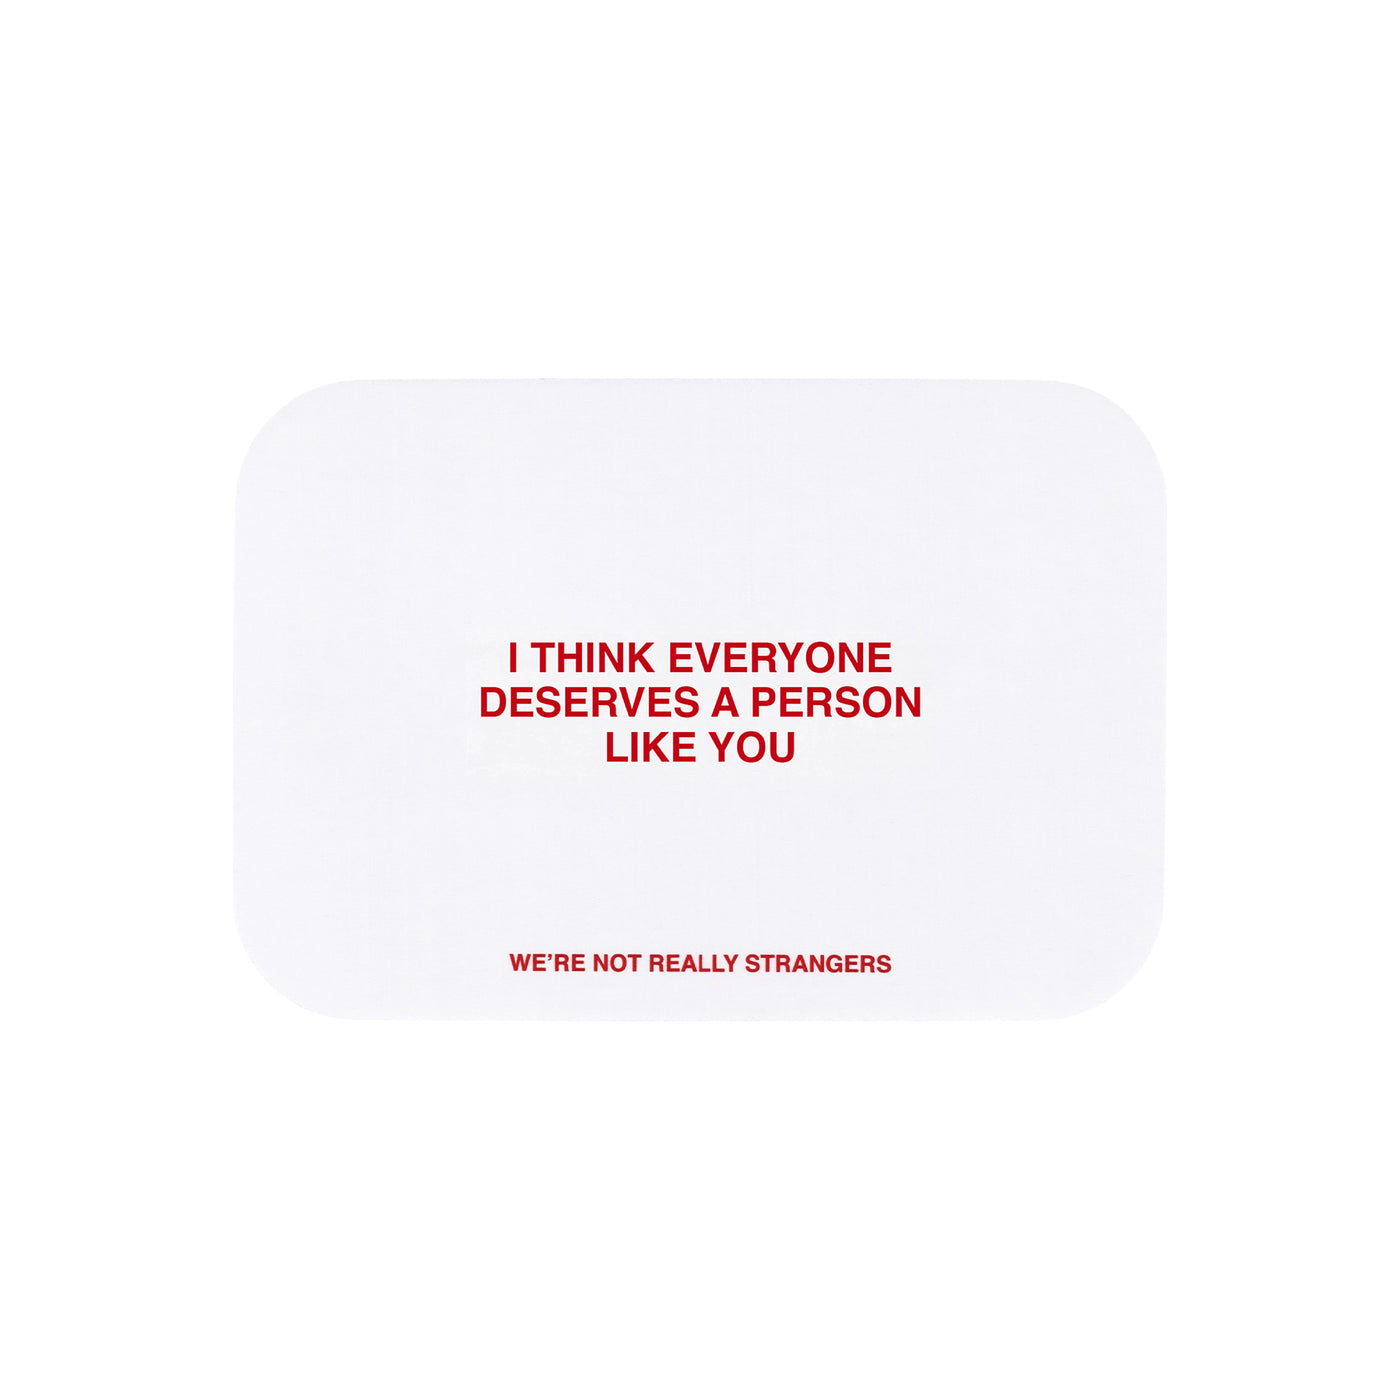 We're Not Really Strangers E-Gift Card. Front facing view of white card option reading "I think everyone deserves a person like you" in red font.